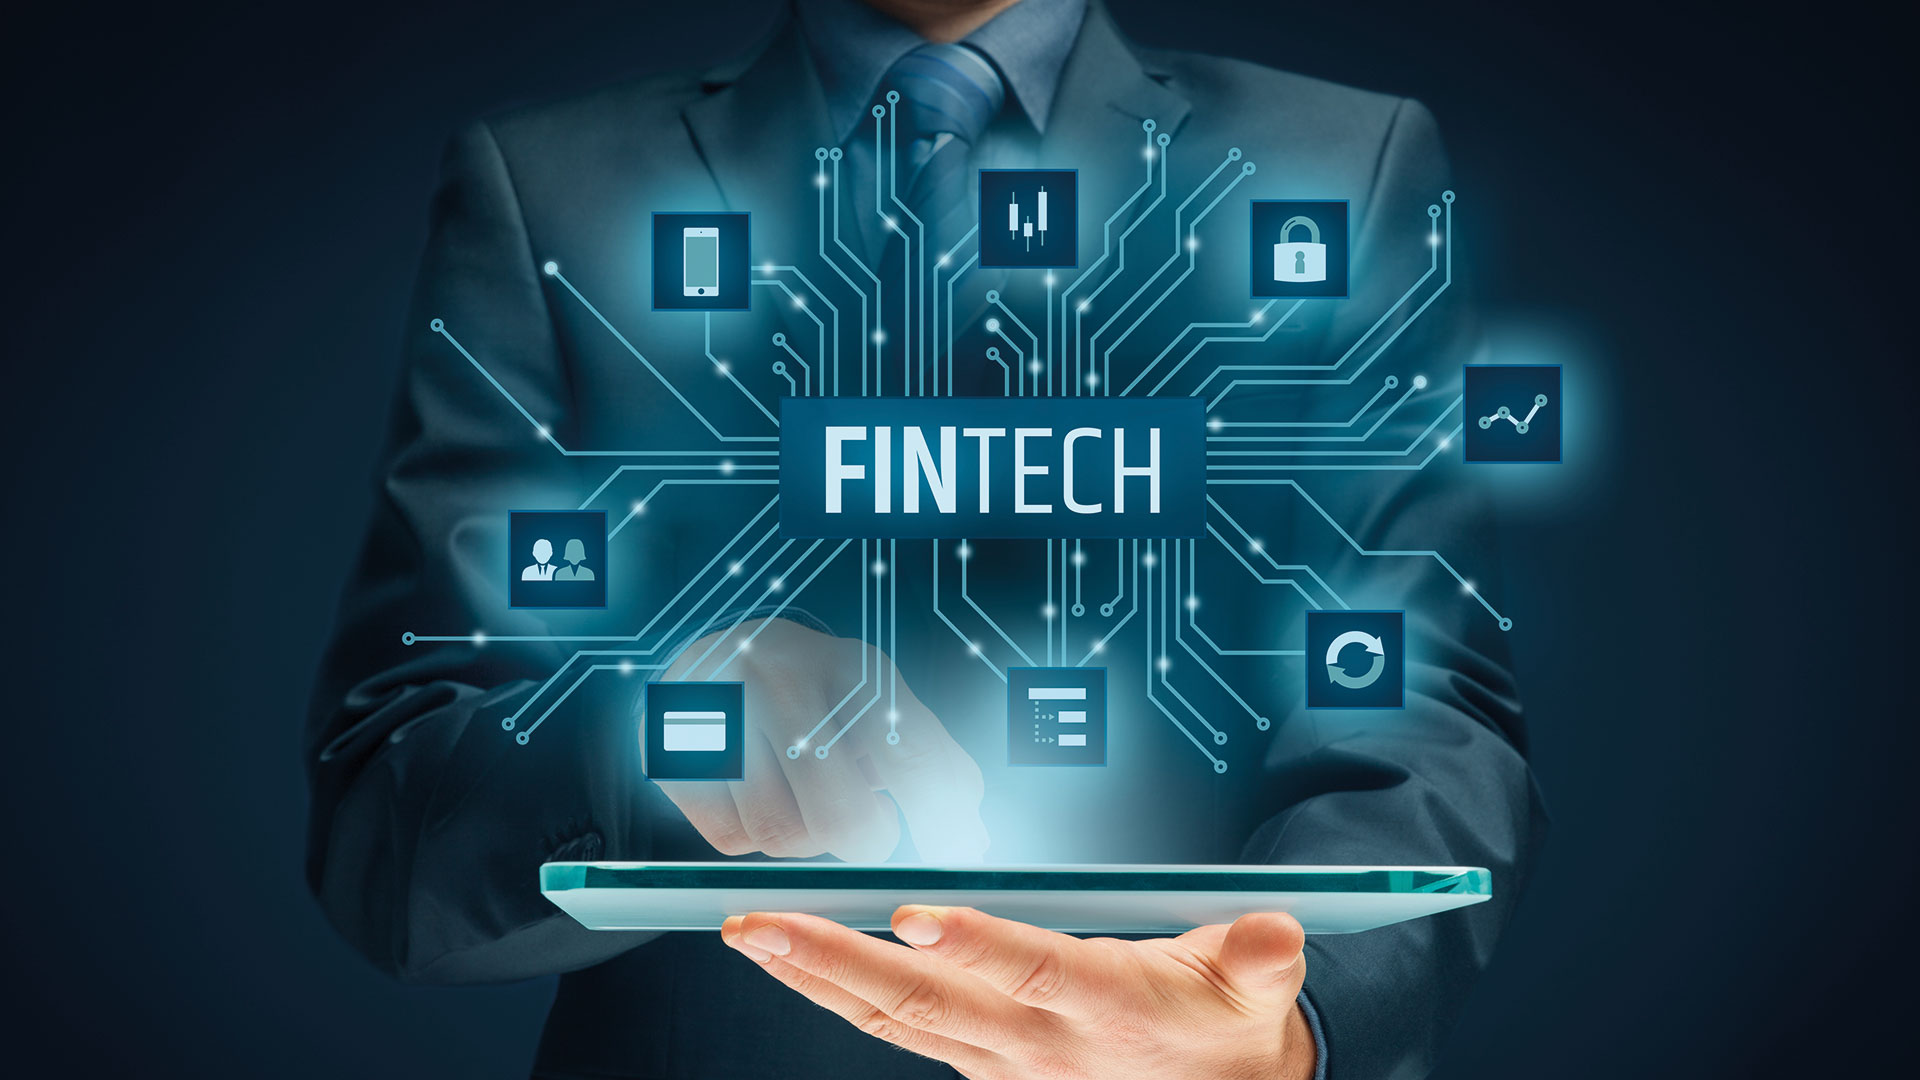 Fintech trends to look out for in 2021